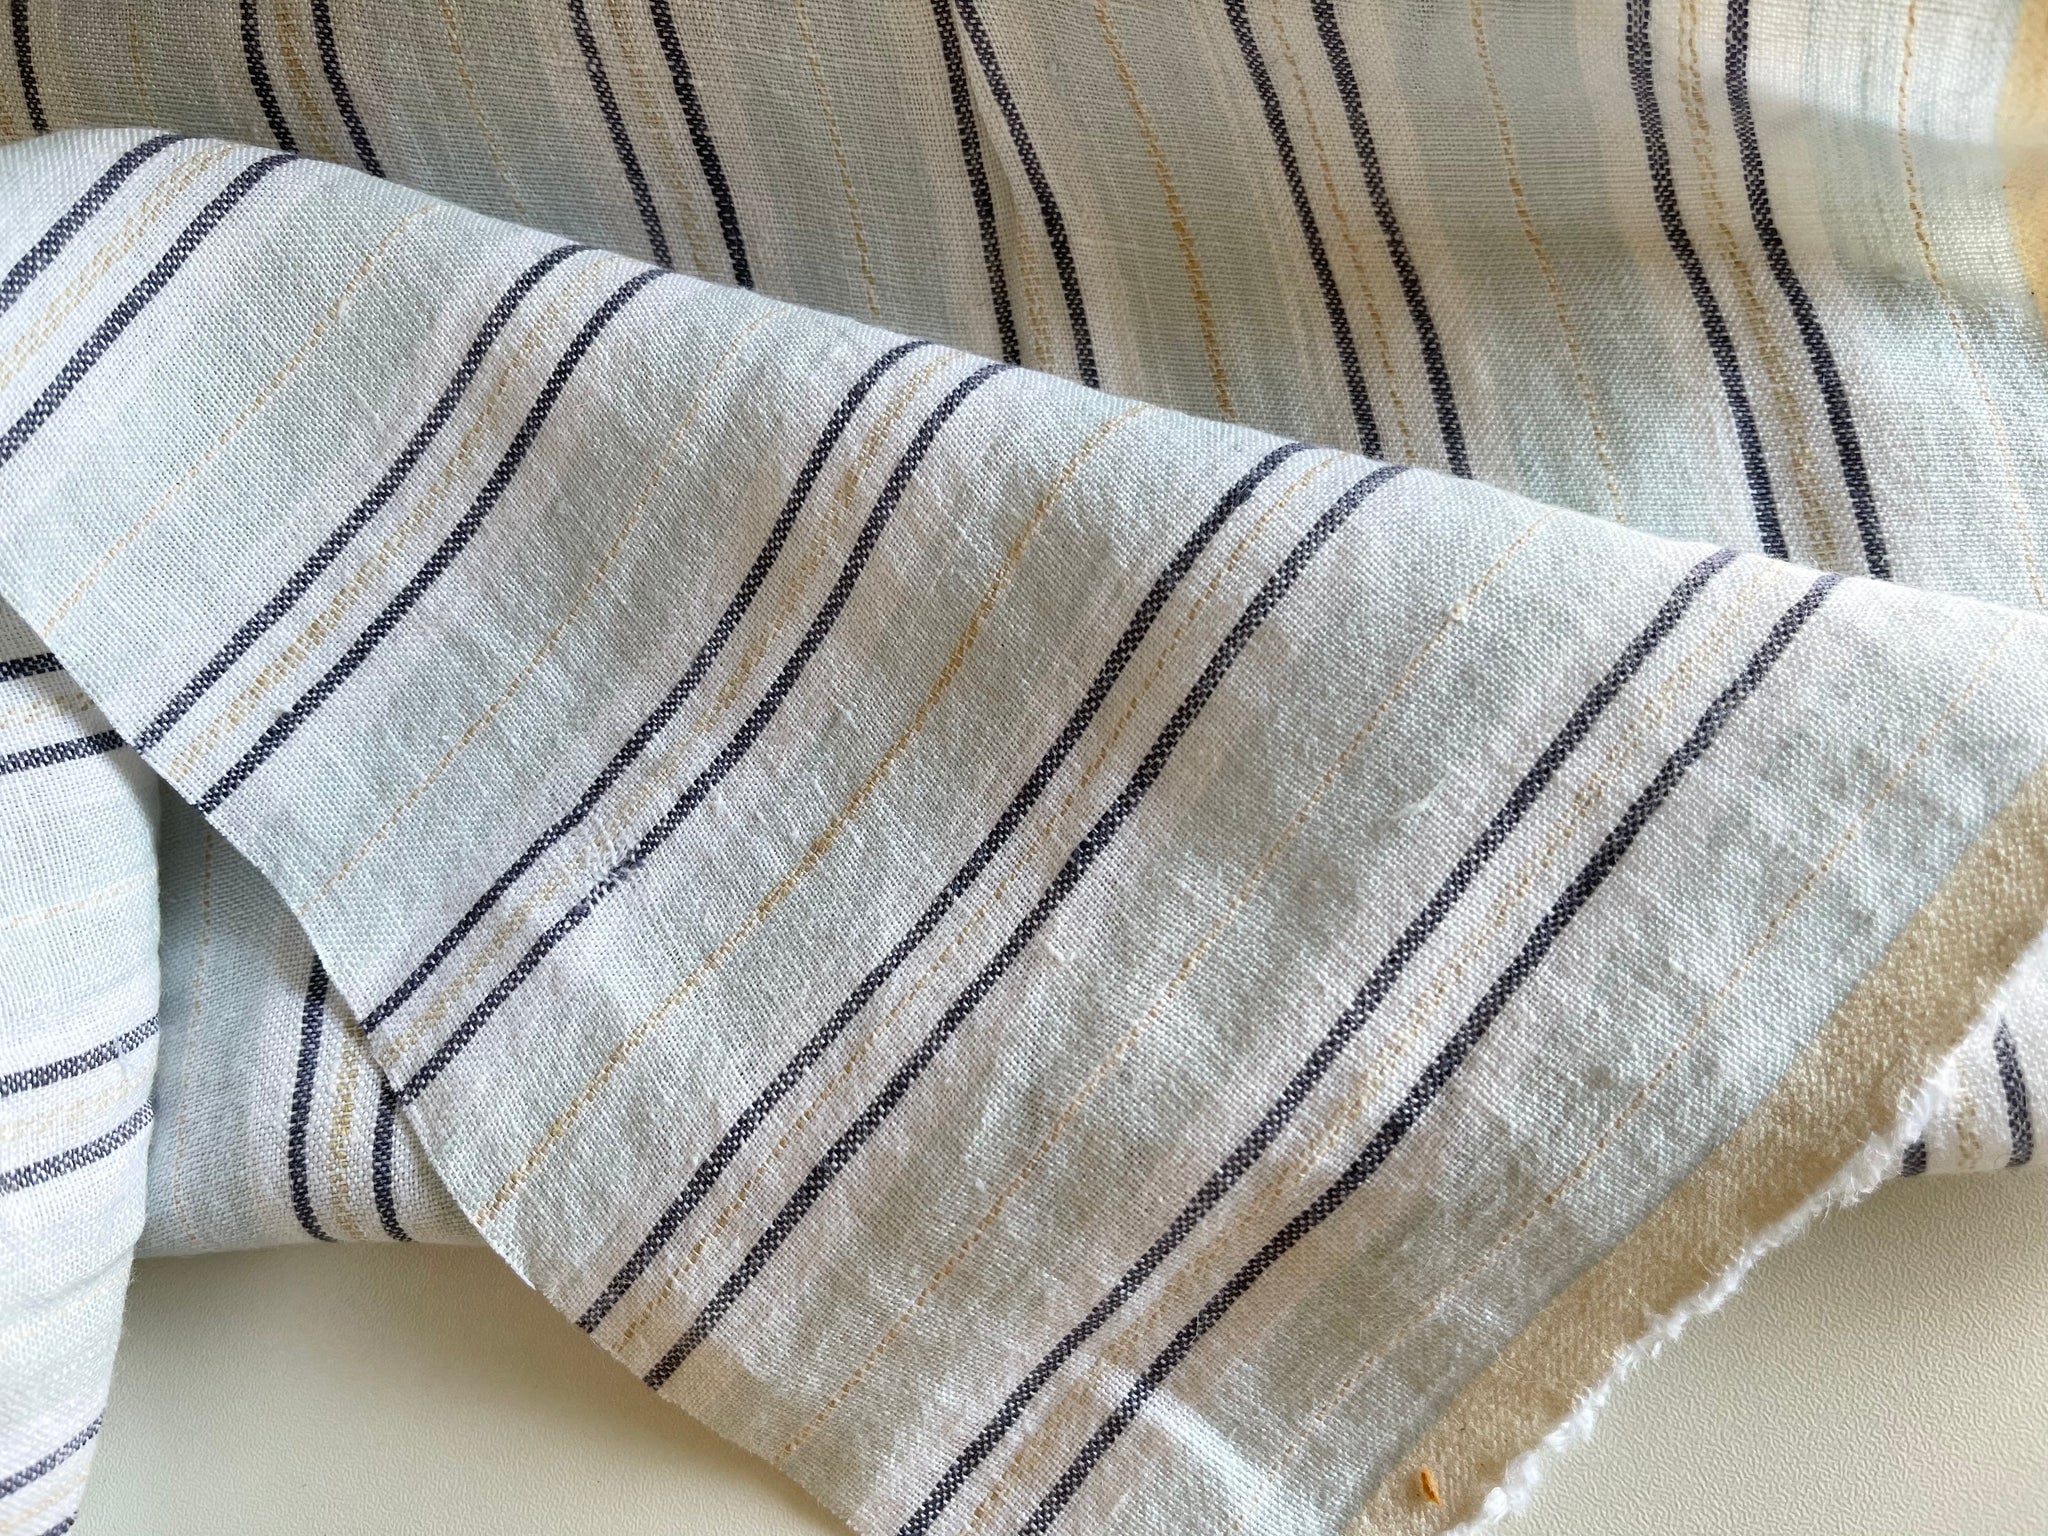 Sky Blue Stripes Linen Fabric - Stone Washed Super Soft